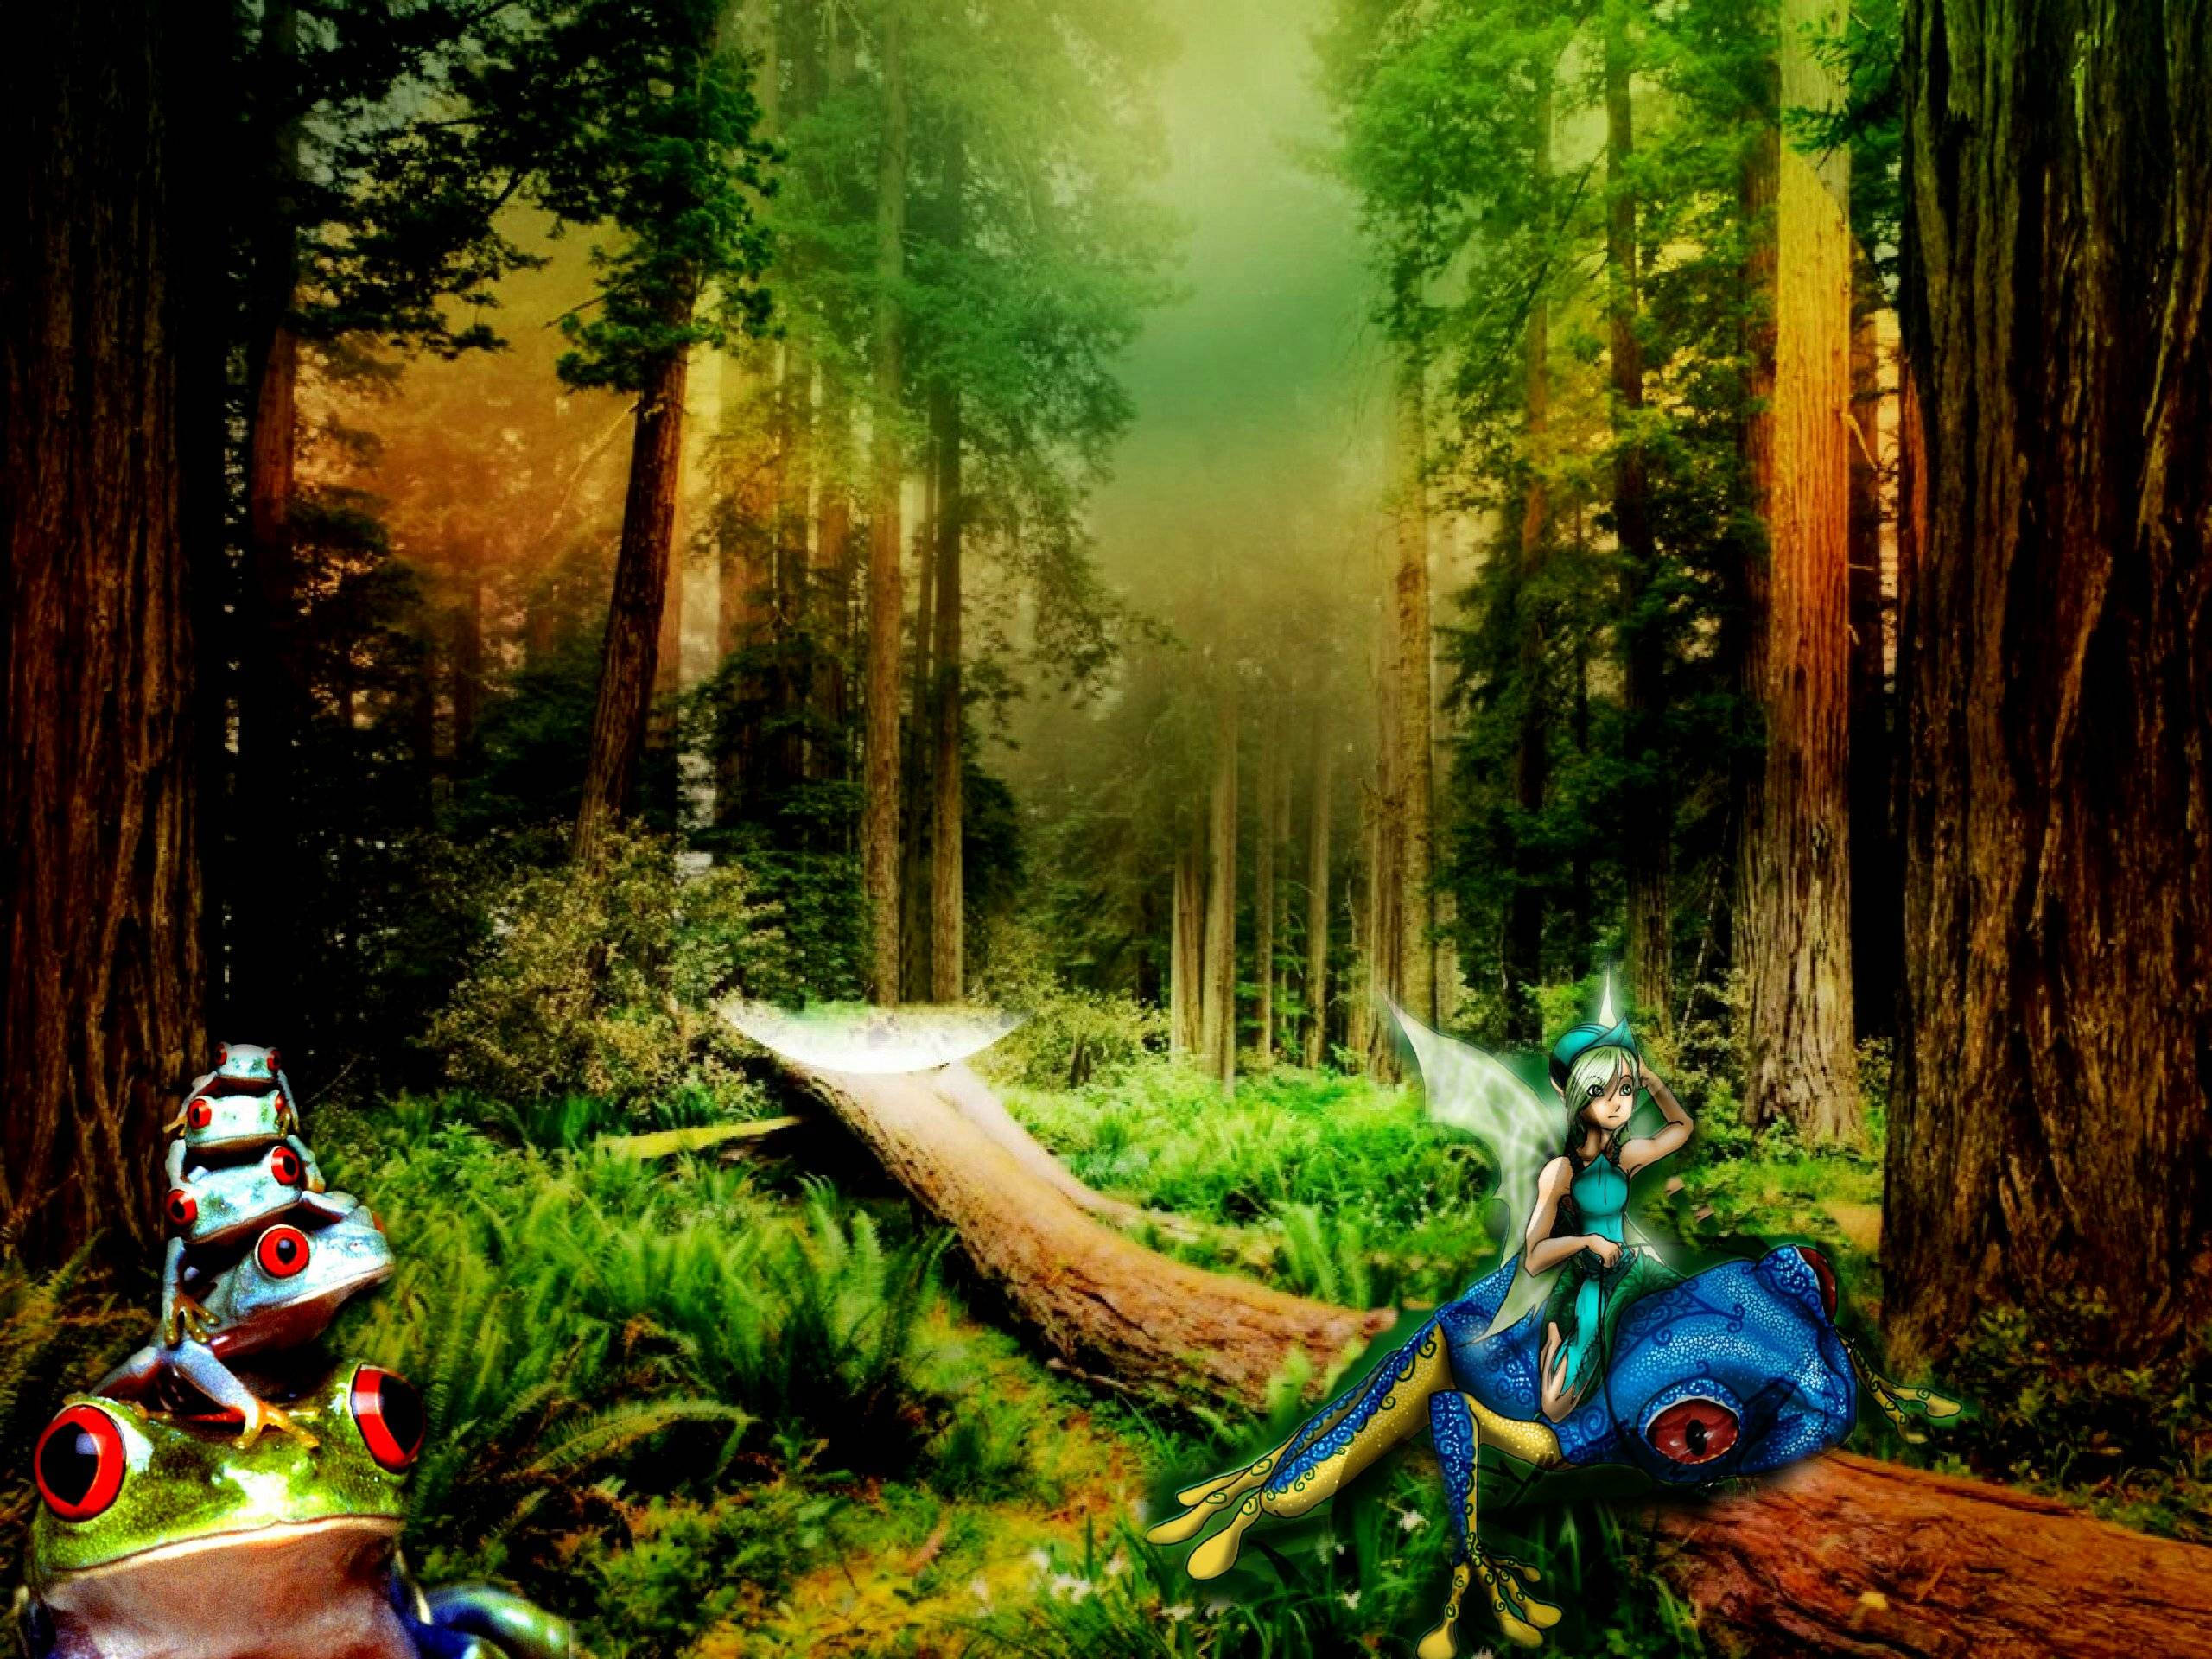 Fairy And Frogs In Enchanted Forest Wallpaper